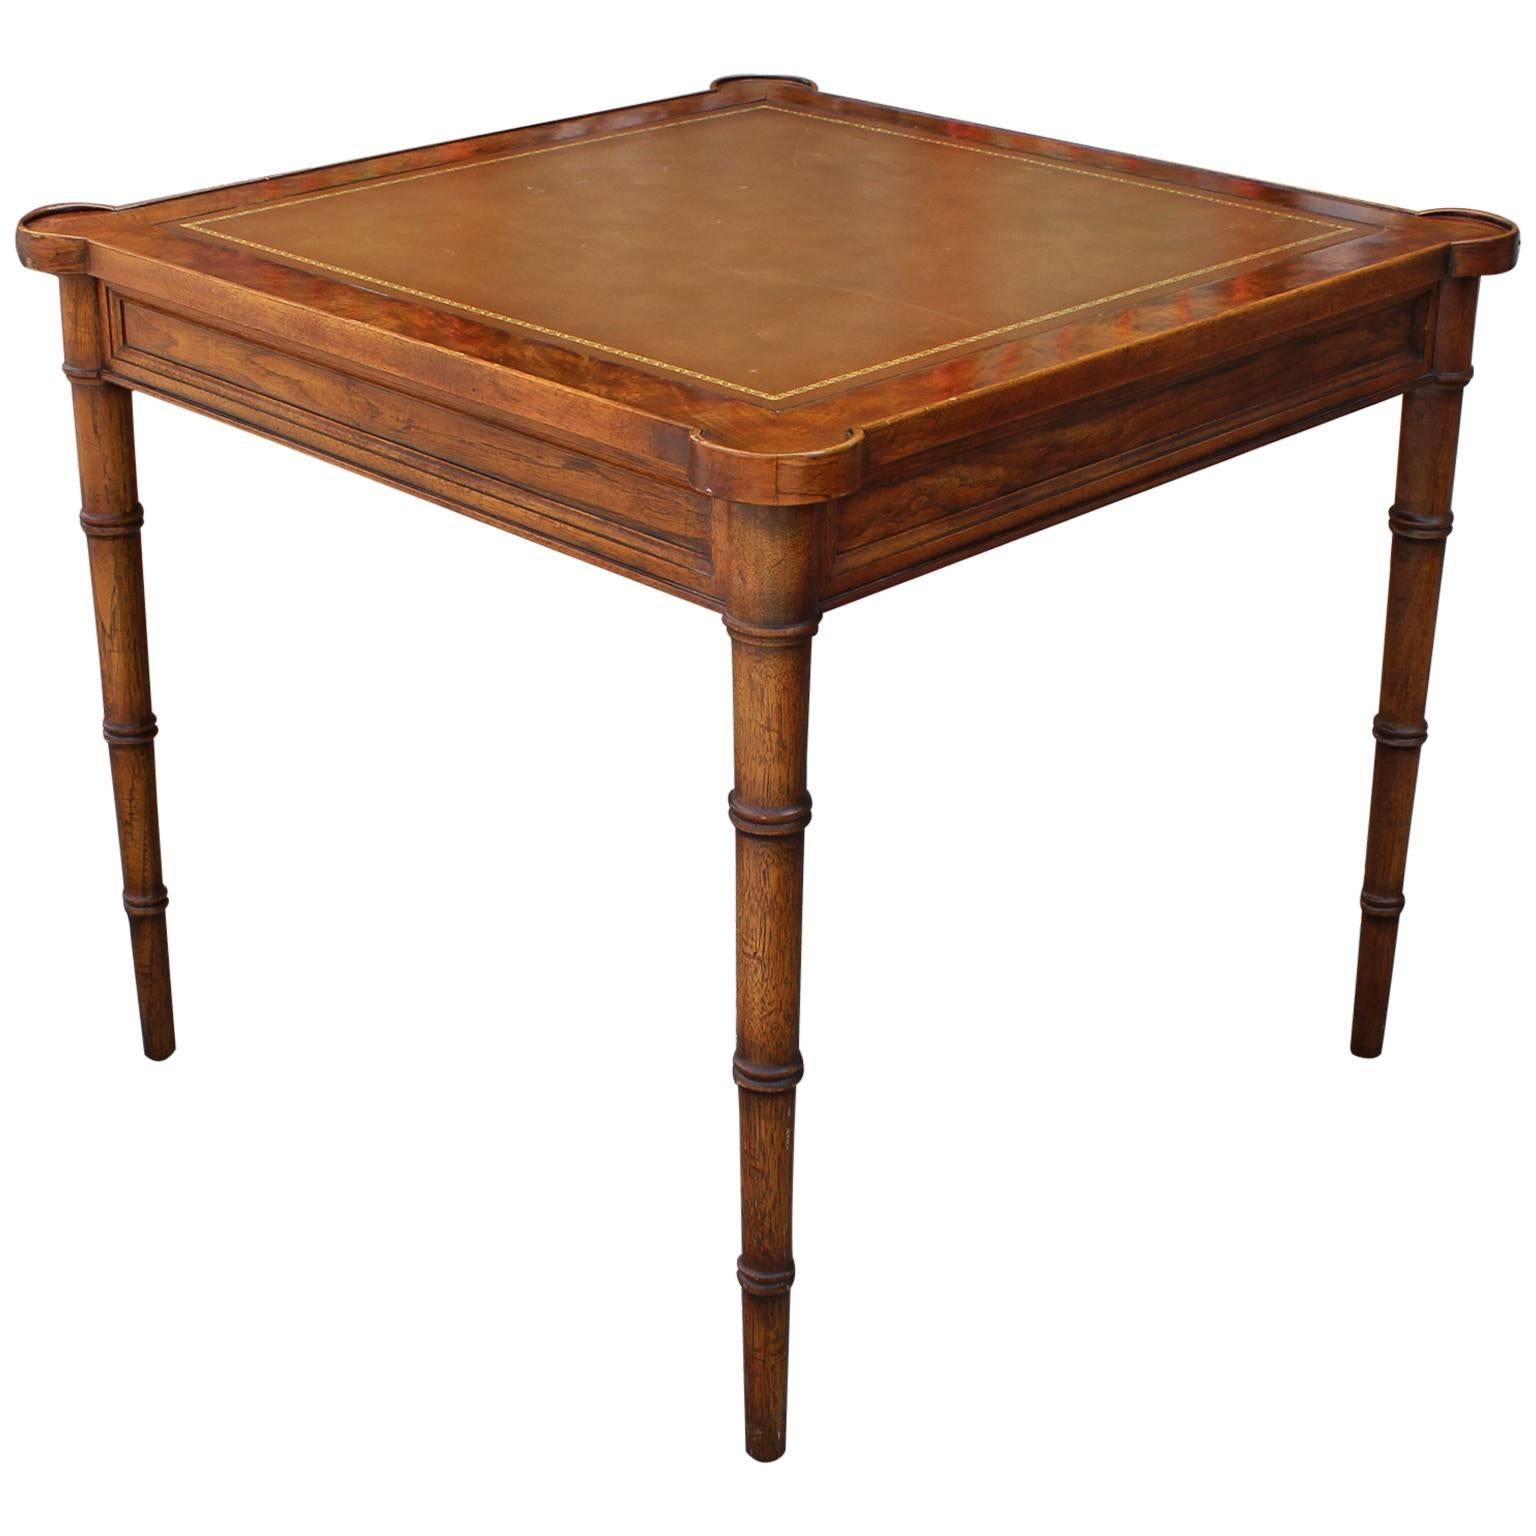 Faux Bamboo and Leather Burl Square Card Table by Drexel